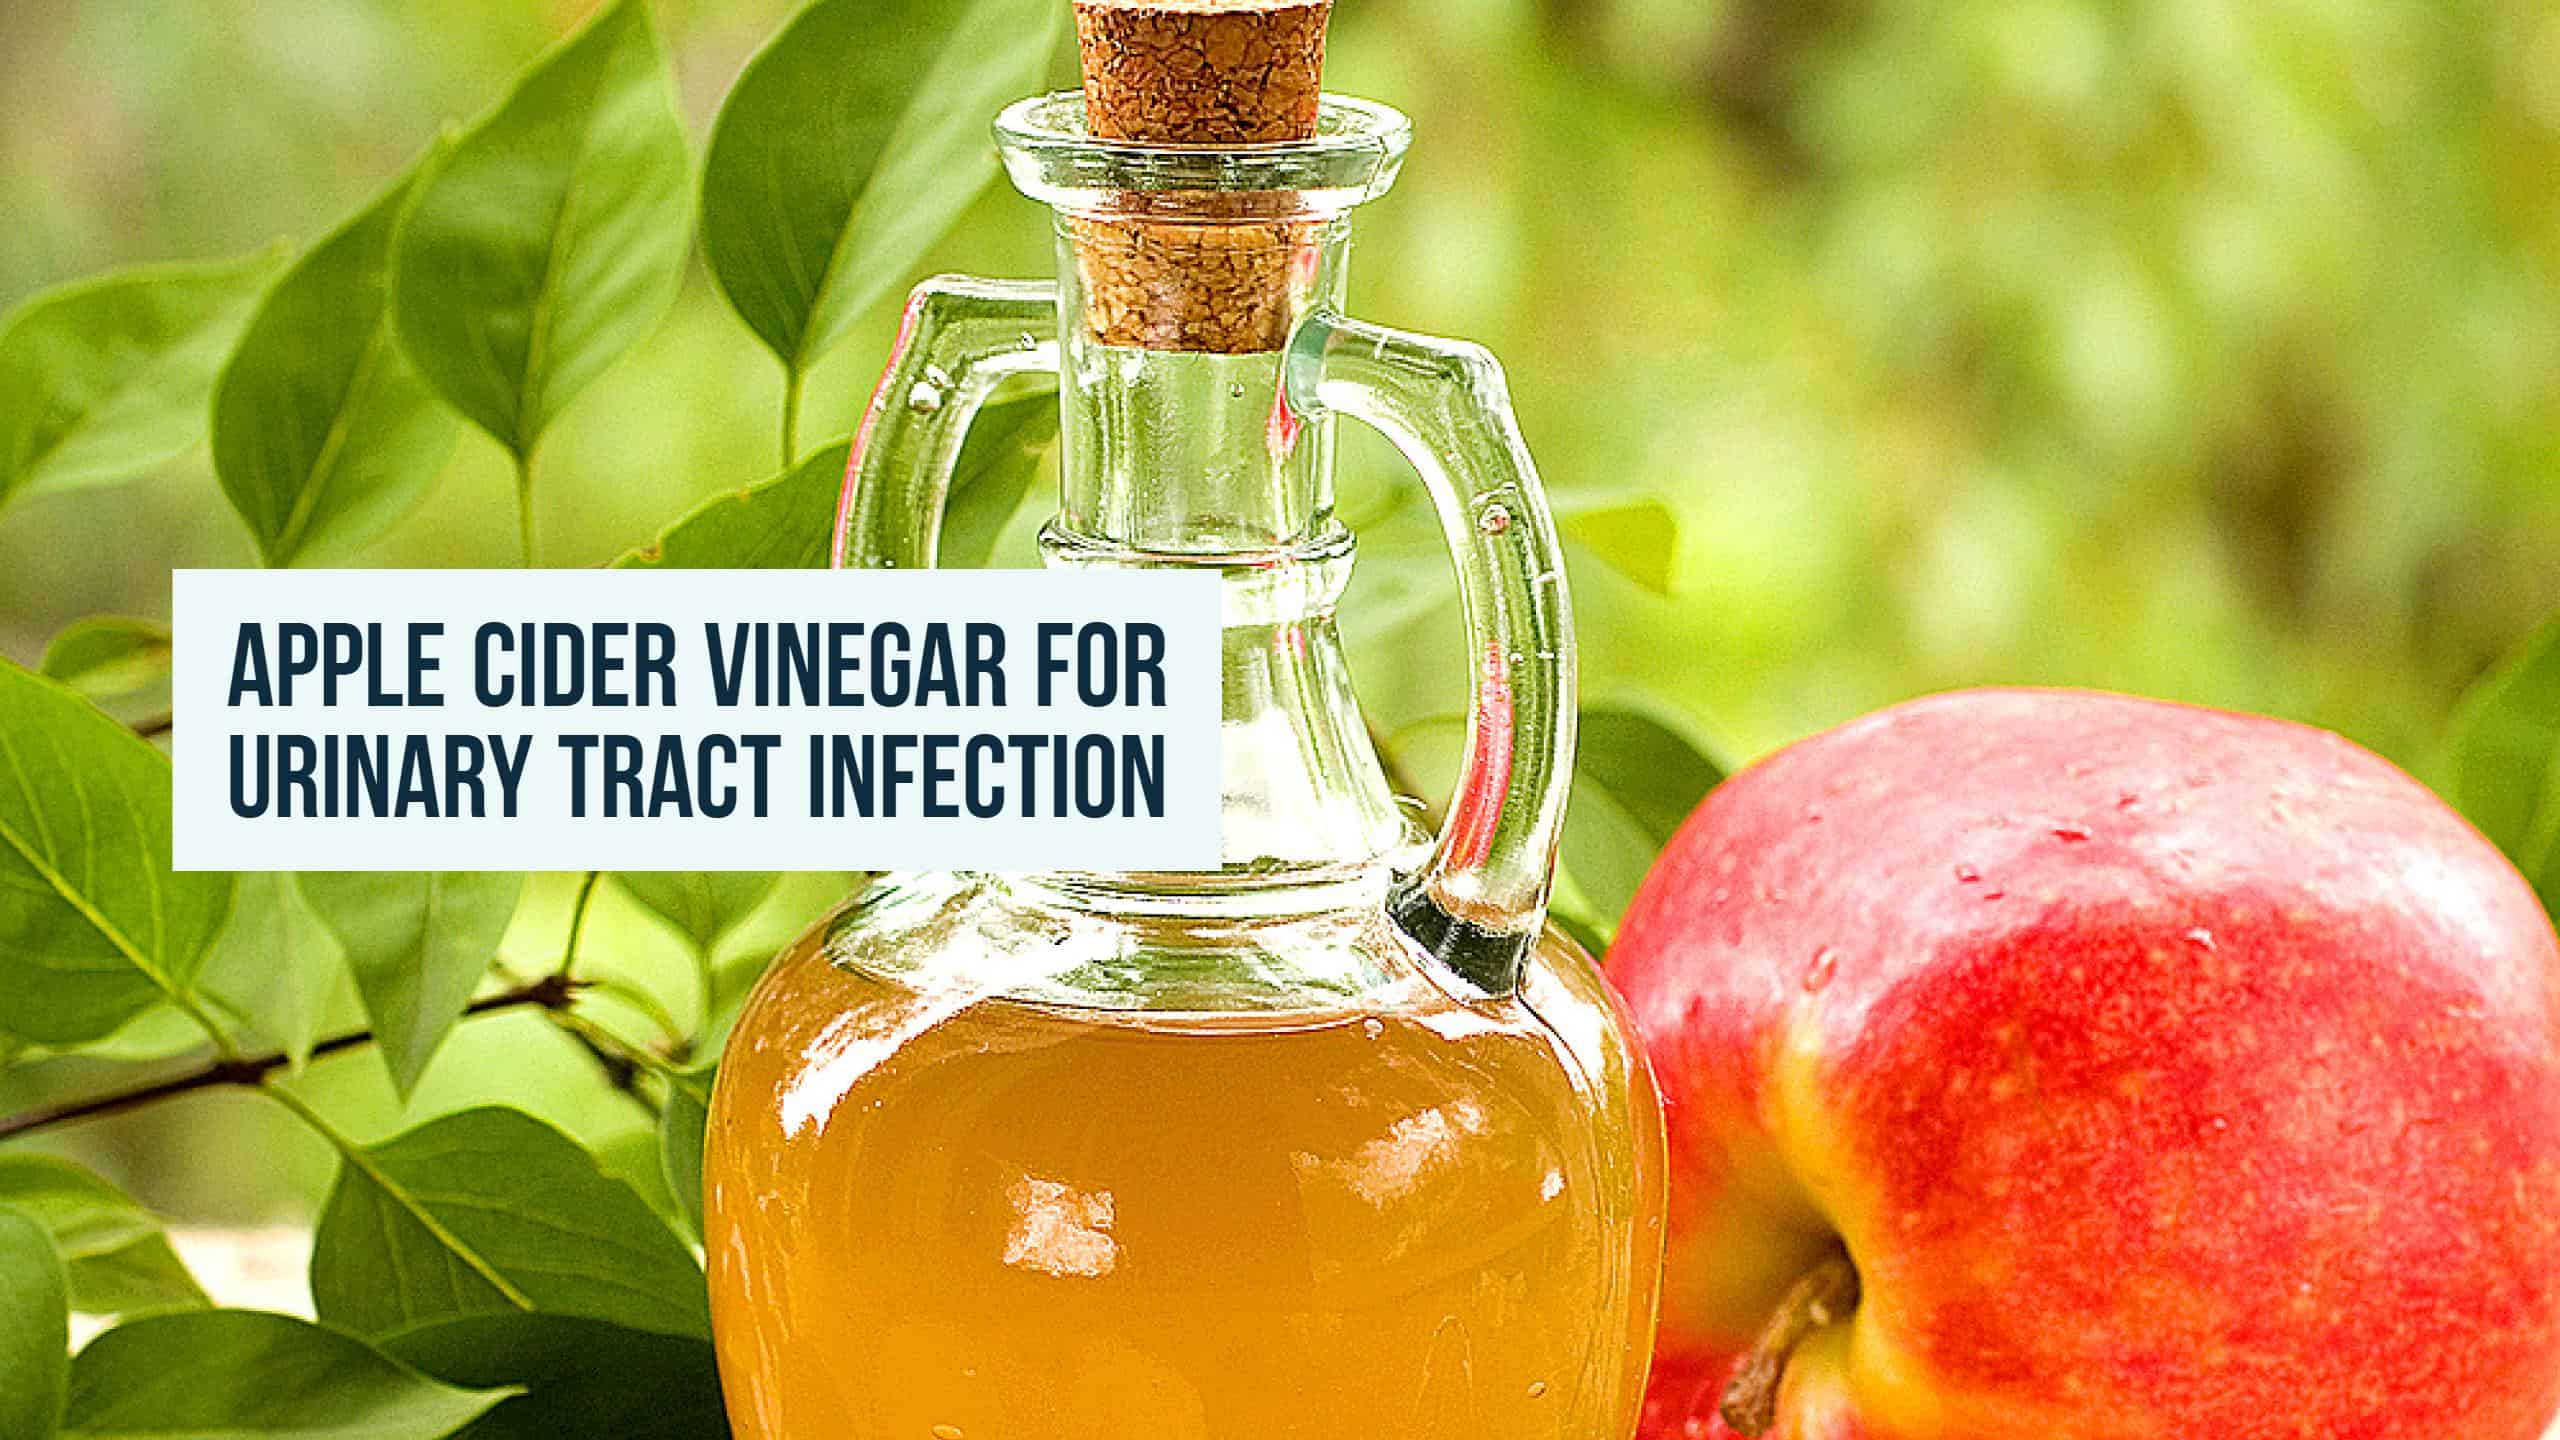 How to Use Apple Cider Vinegar for Urinary Tract Infection